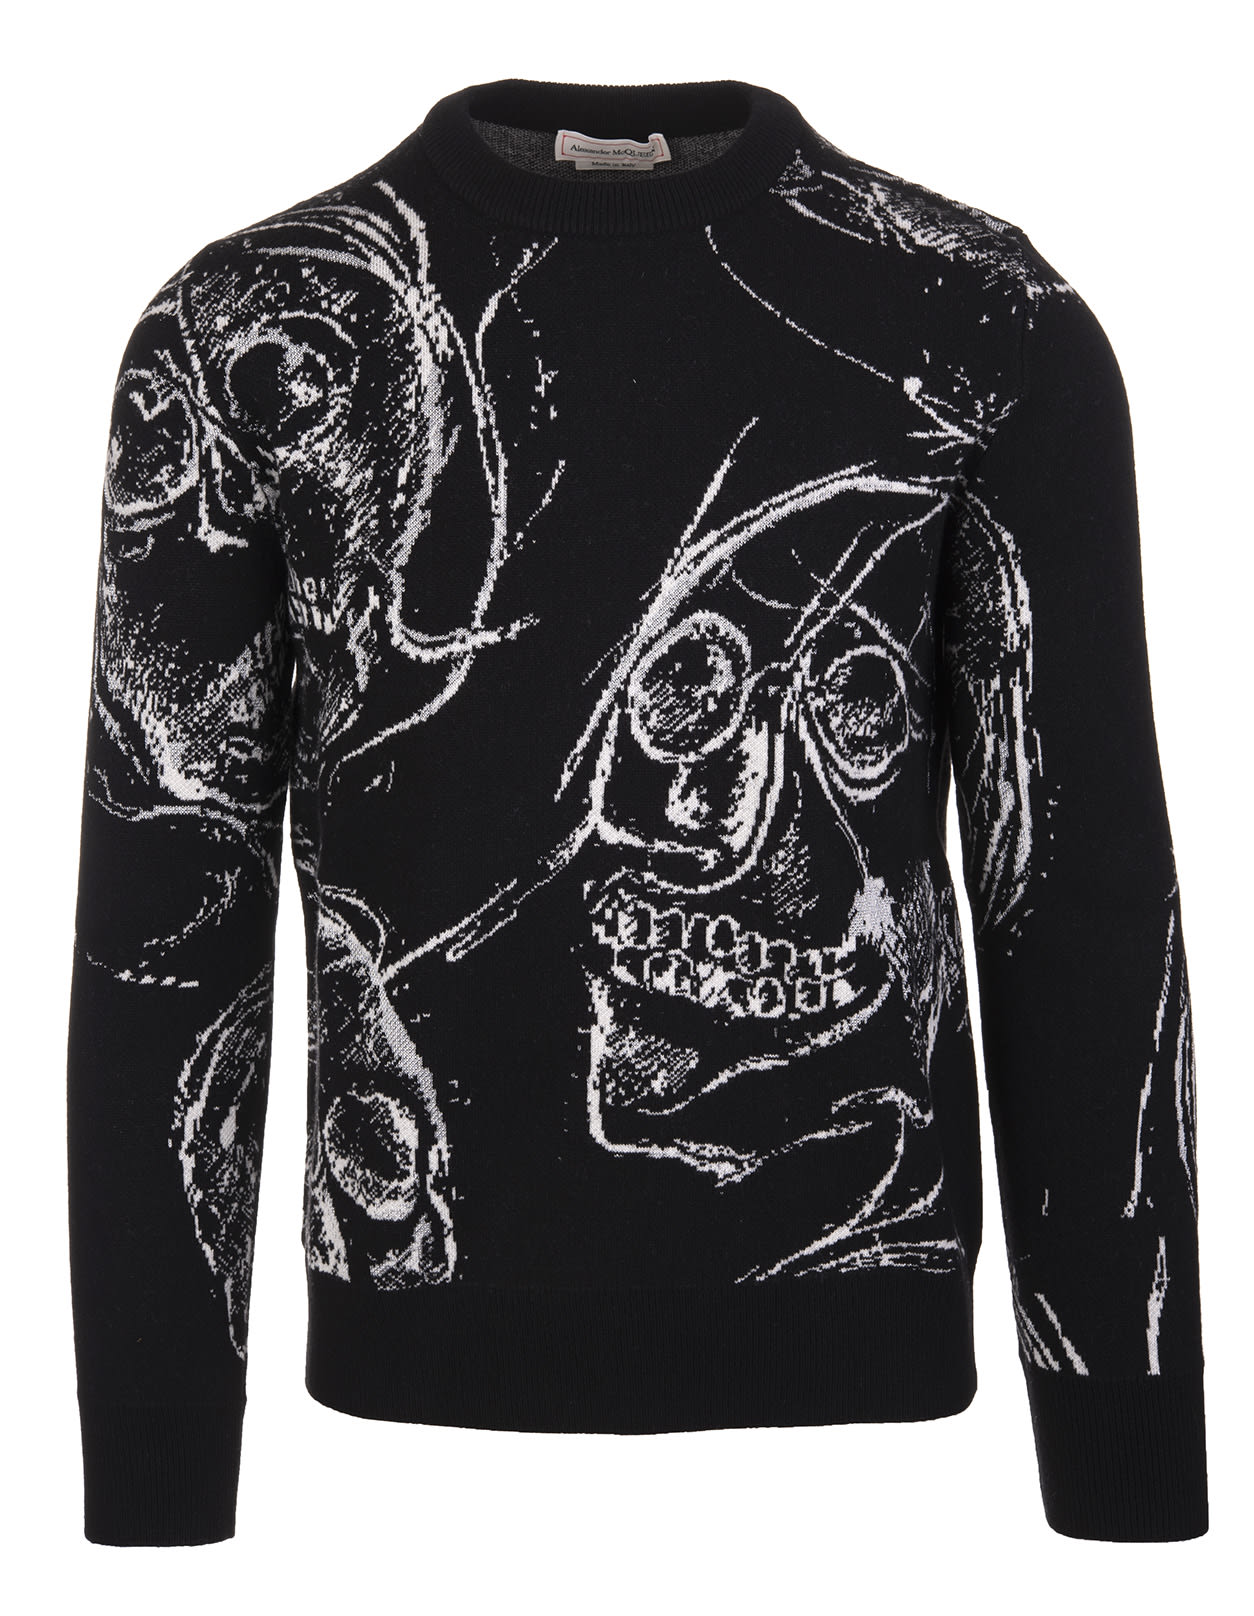 Alexander McQueen Man Black Jacquard Sweater With Painted Skull